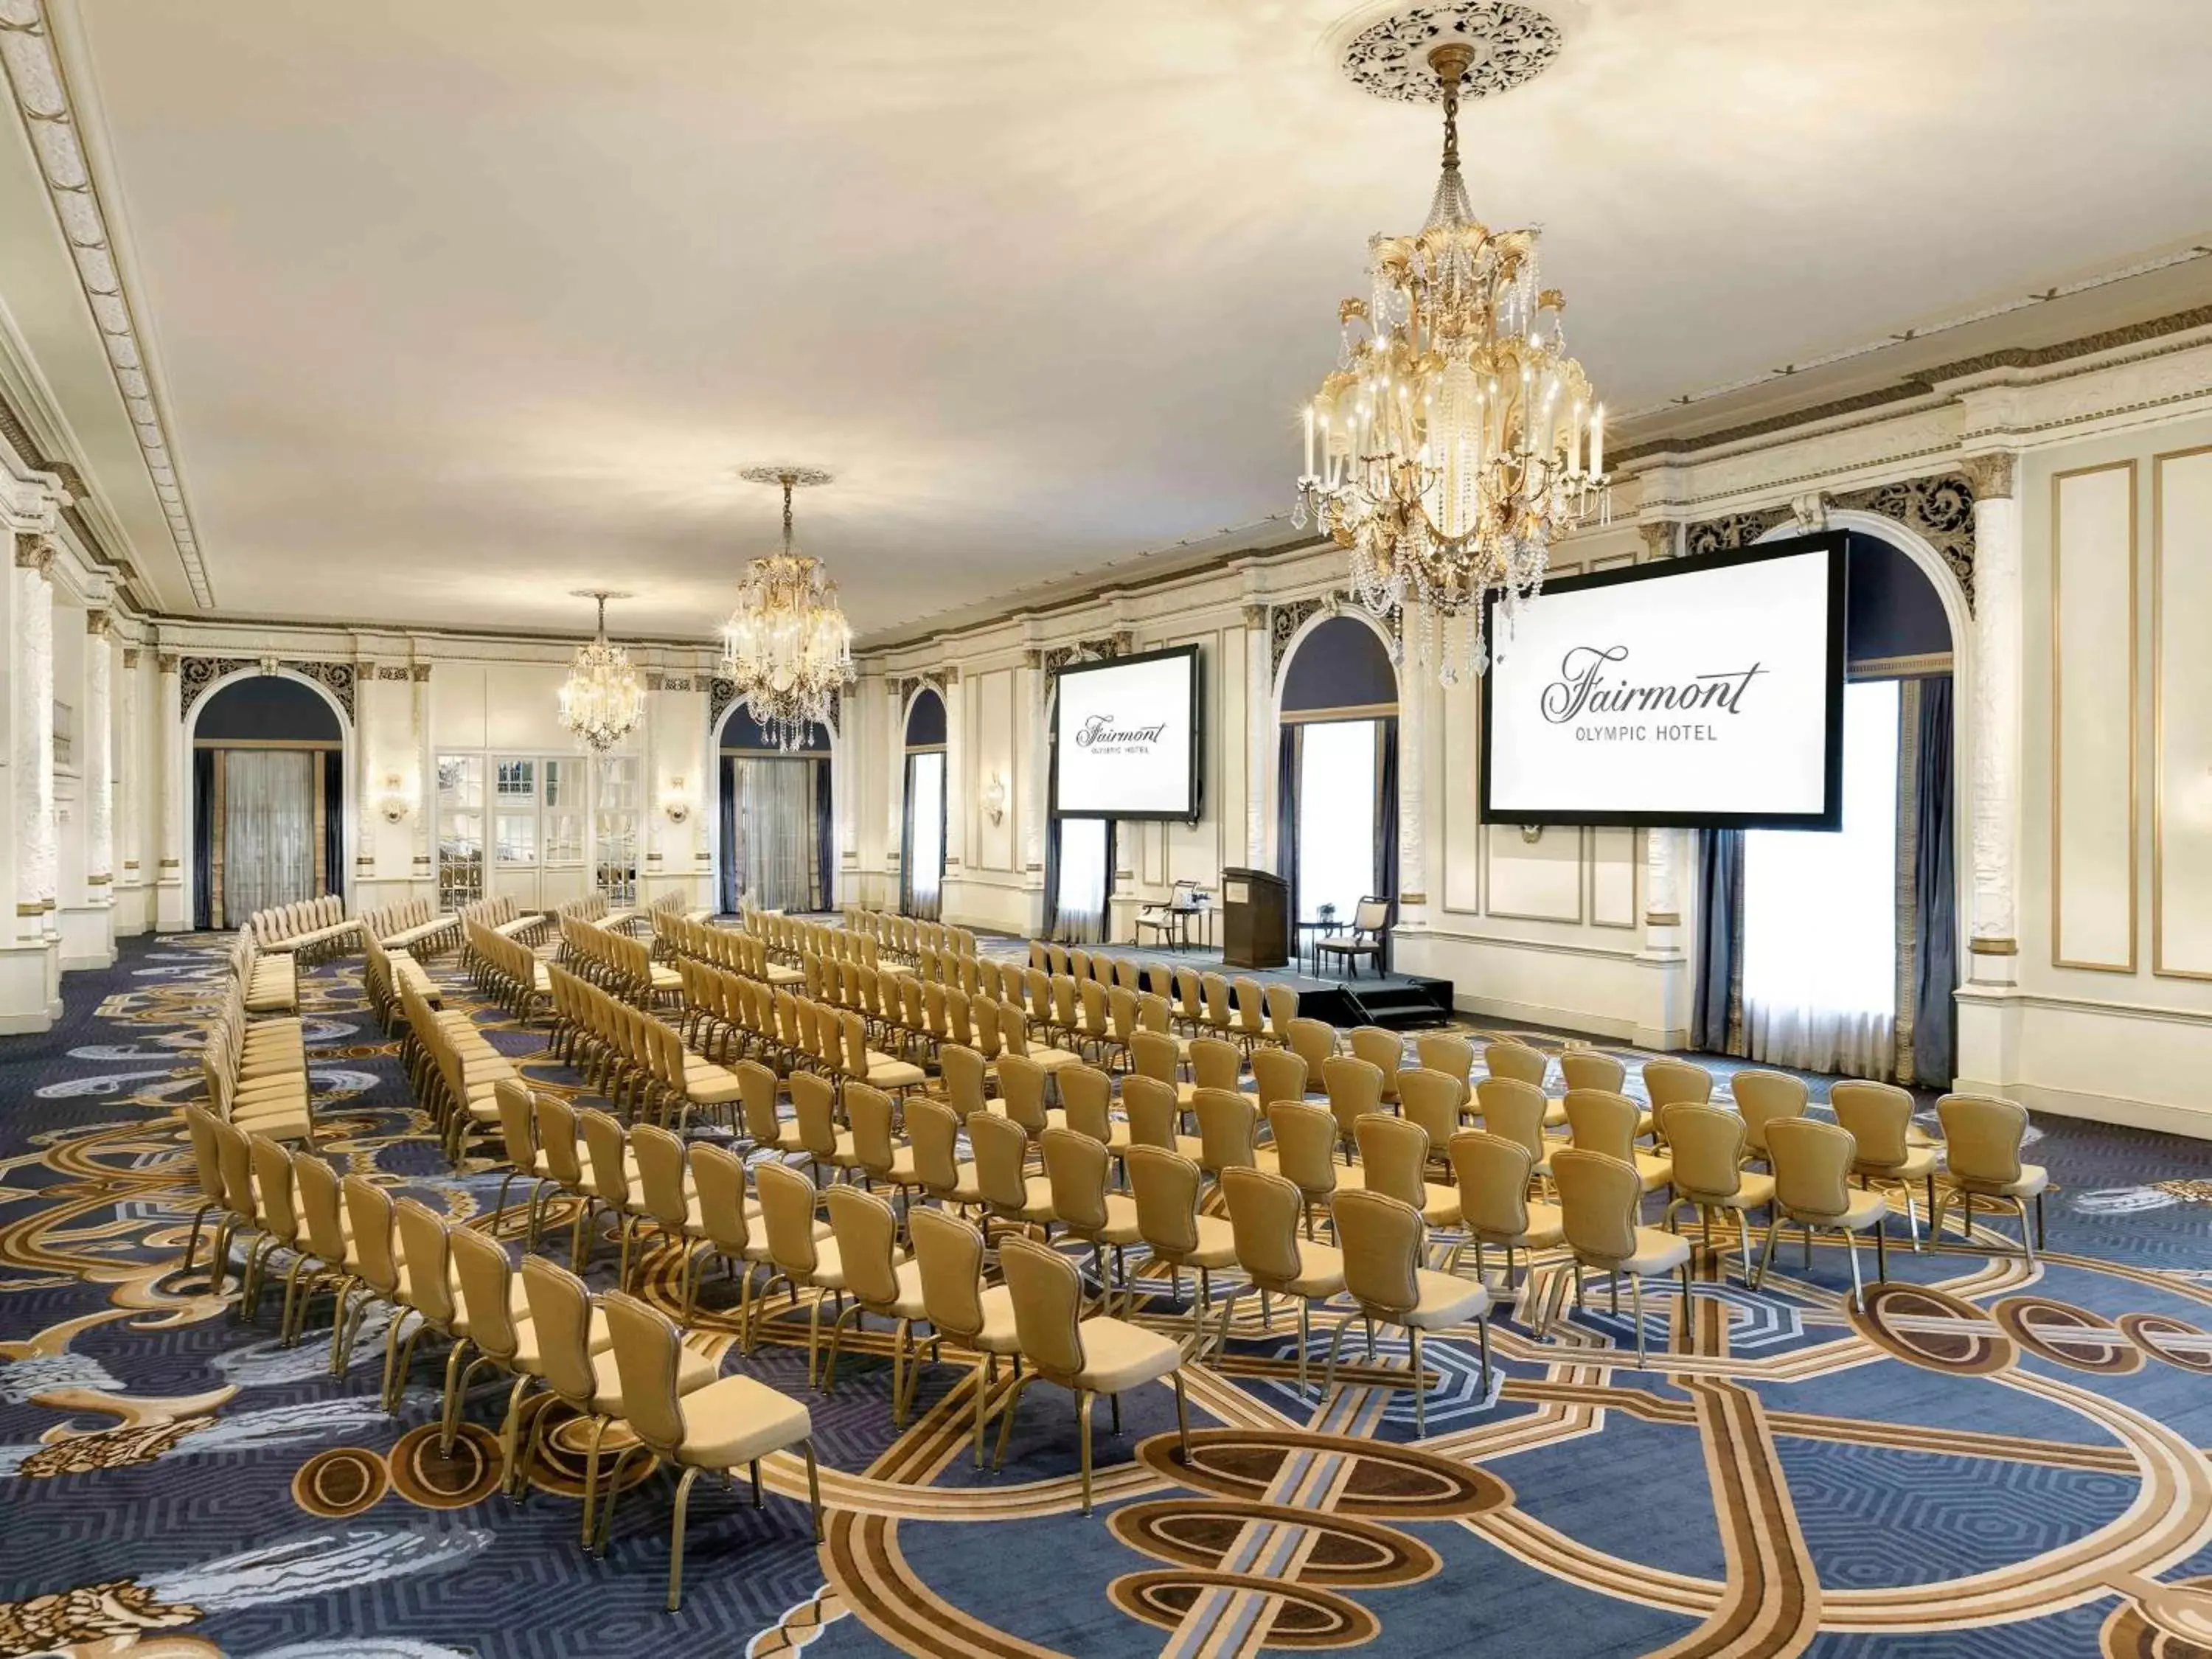 Meeting/conference room in Fairmont Olympic Hotel